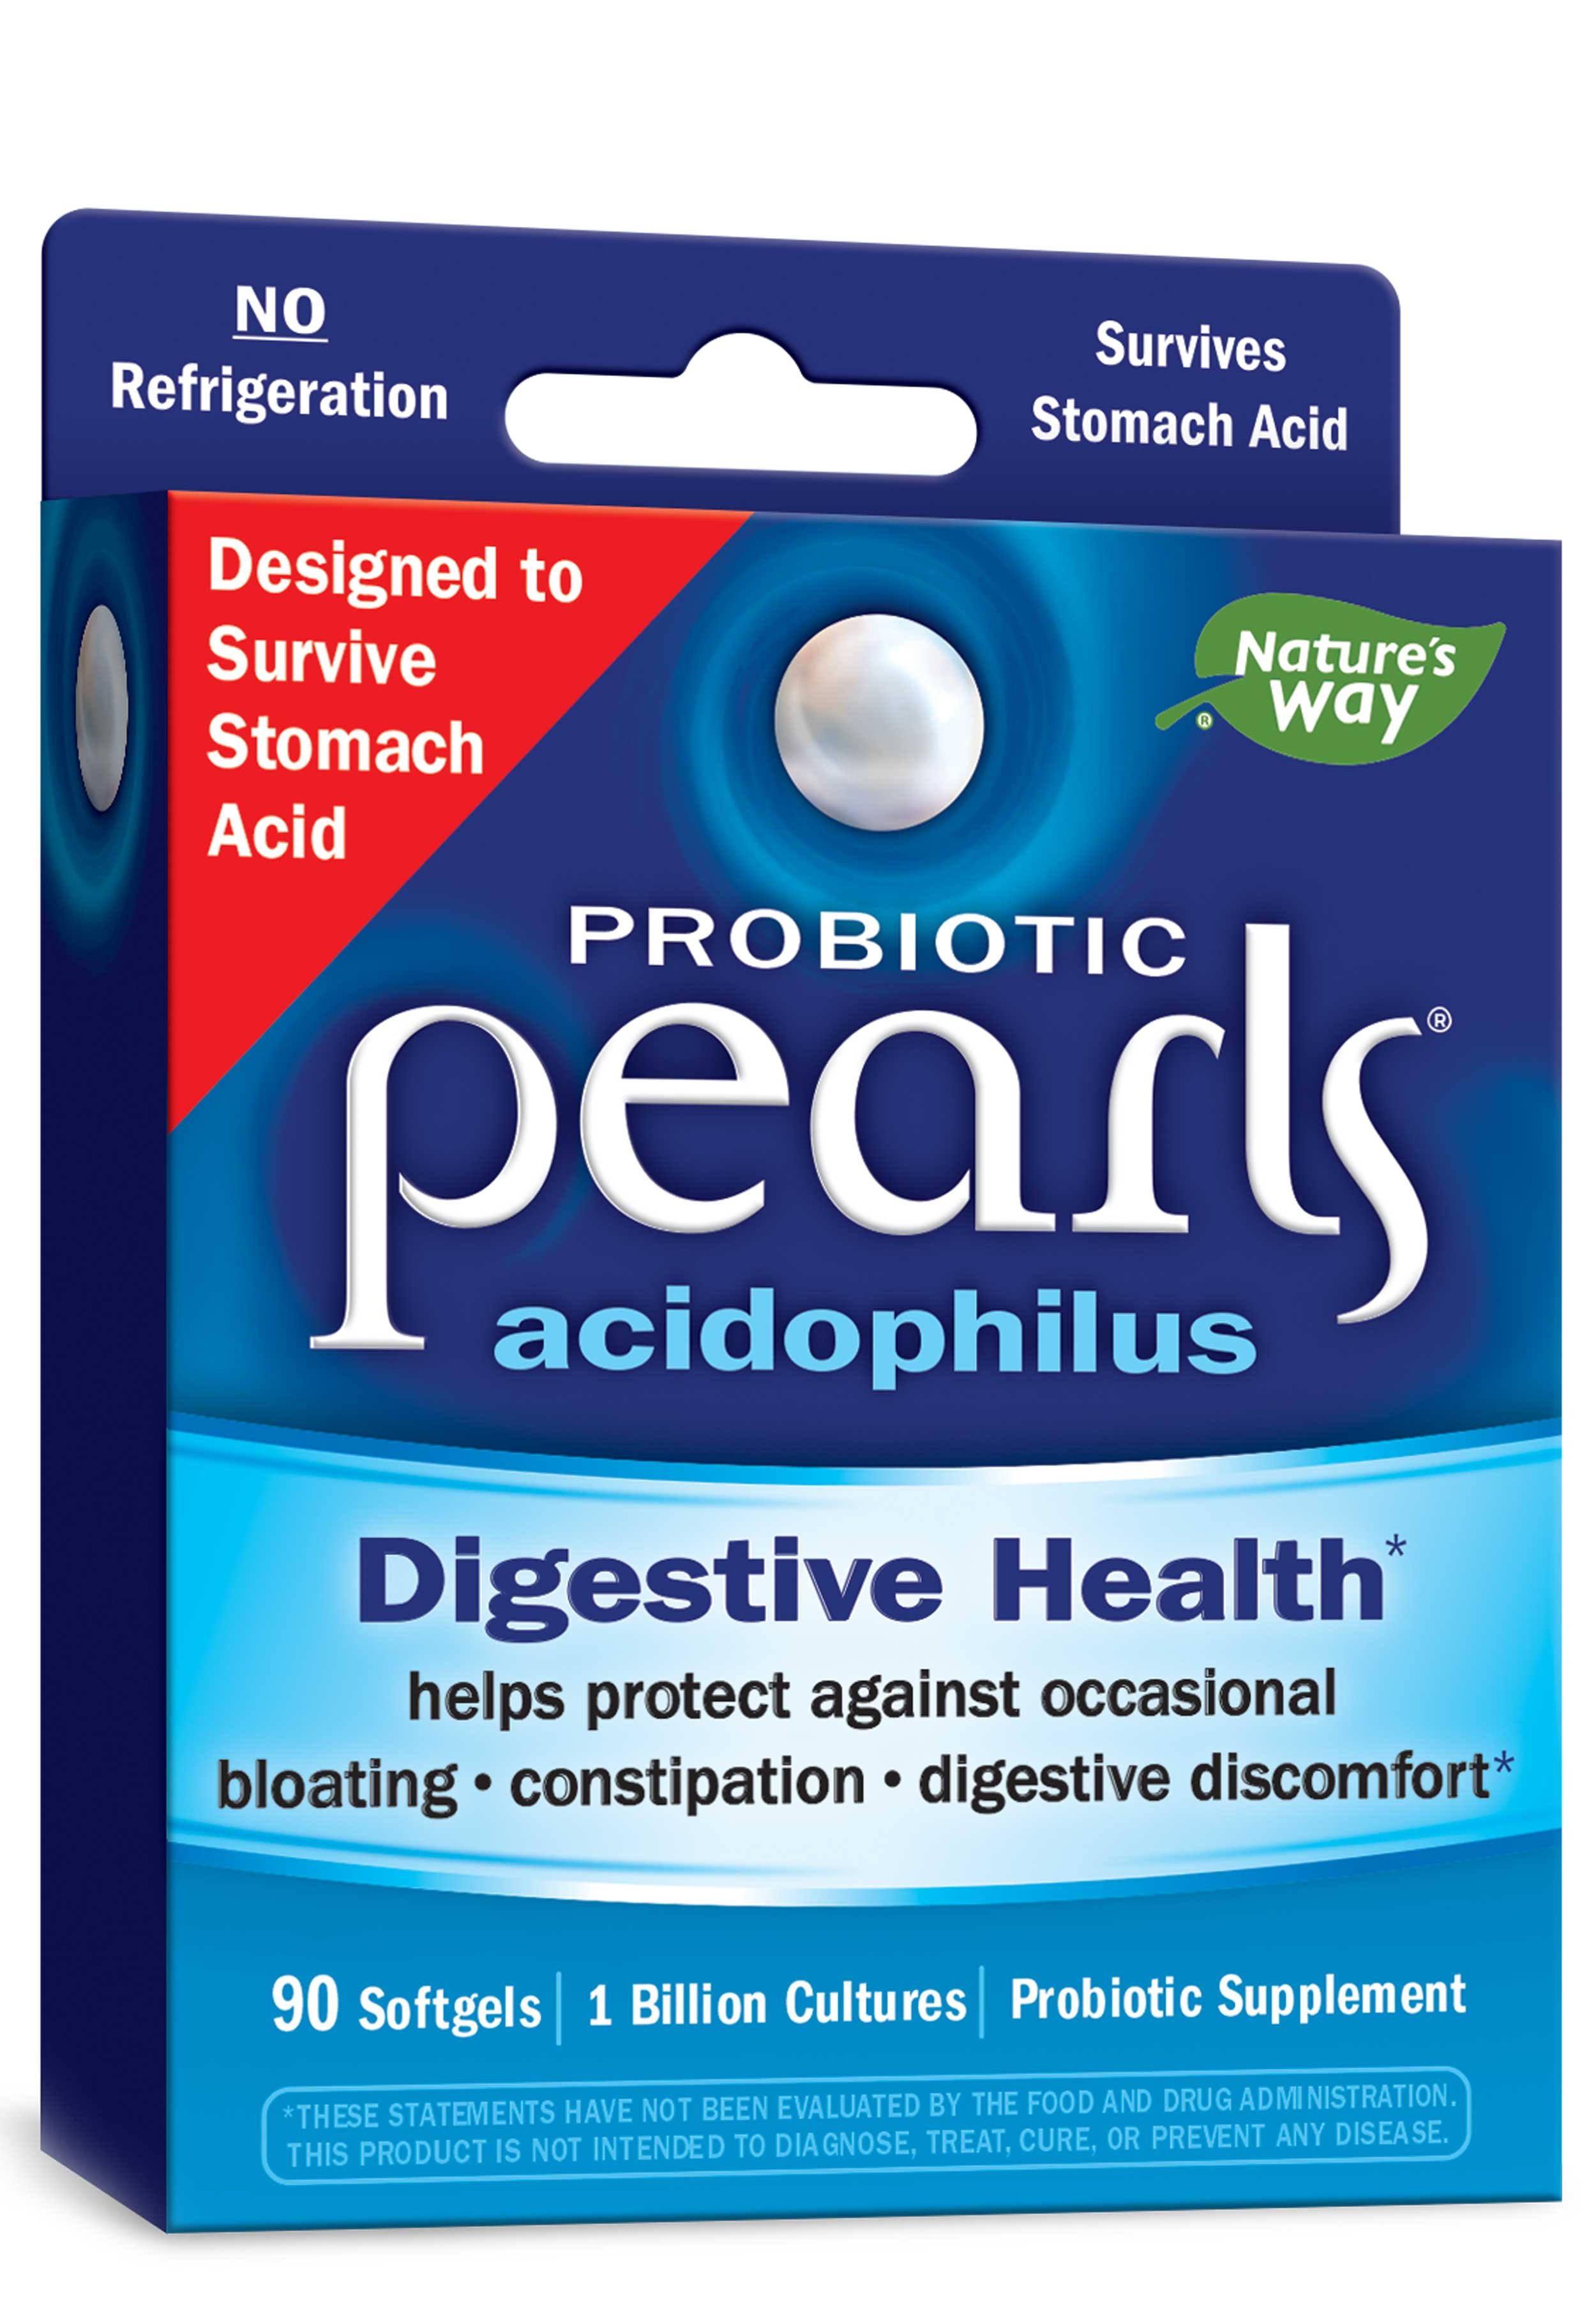 Enzymatic Theraphy Probiotic Pearls Acidophilus - x30